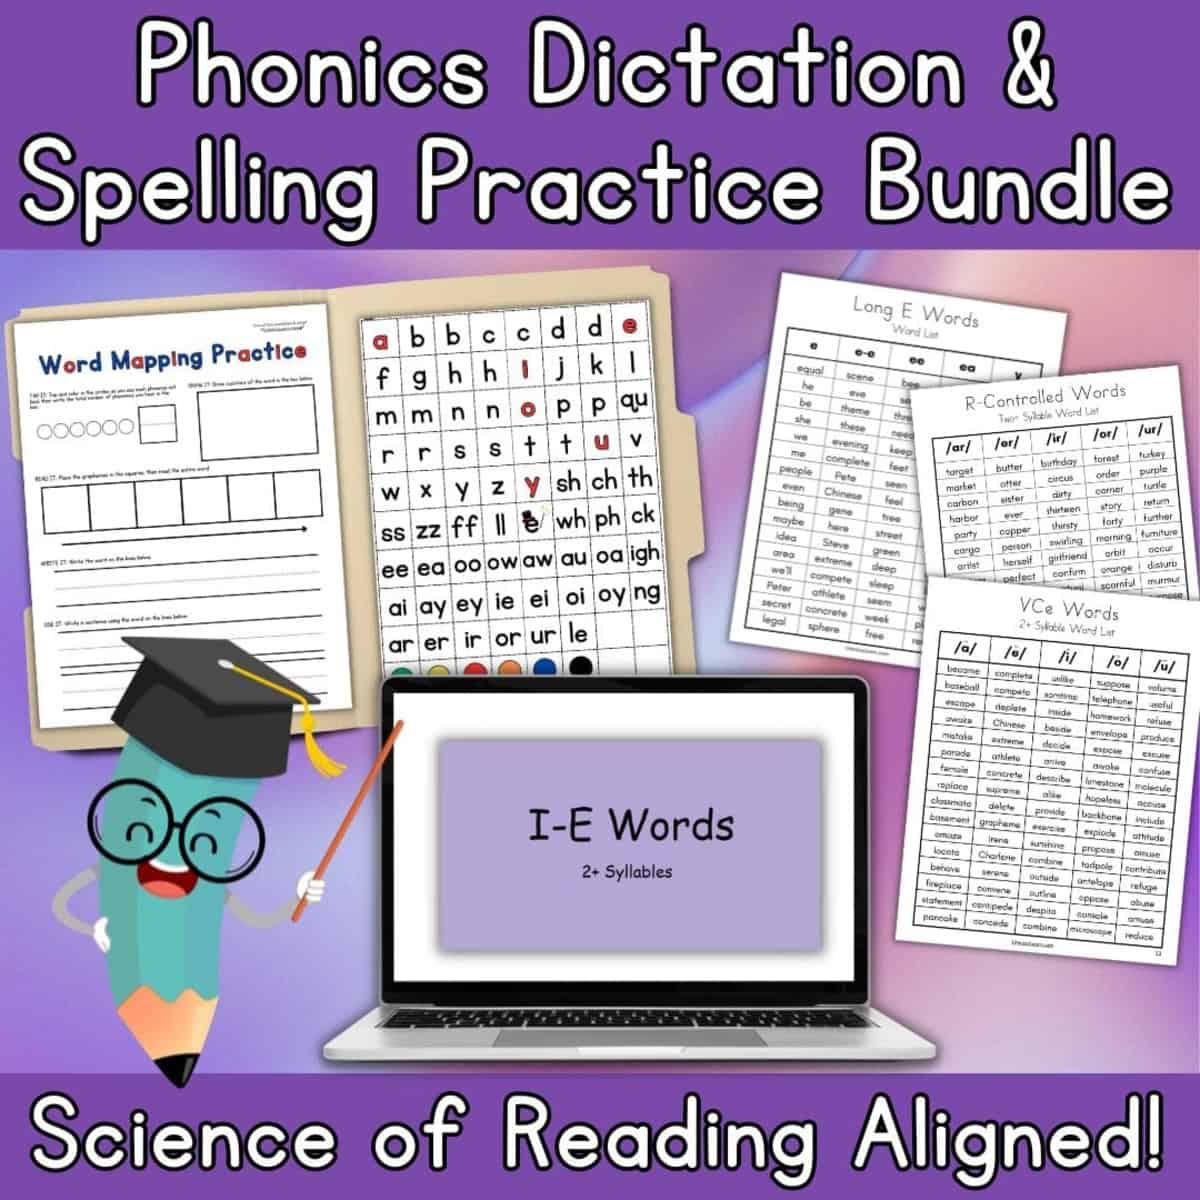 Purple graphic with computer, phonics folder, and word lists entitled 'Phonics Dictation & Spelling Practice Bundle."